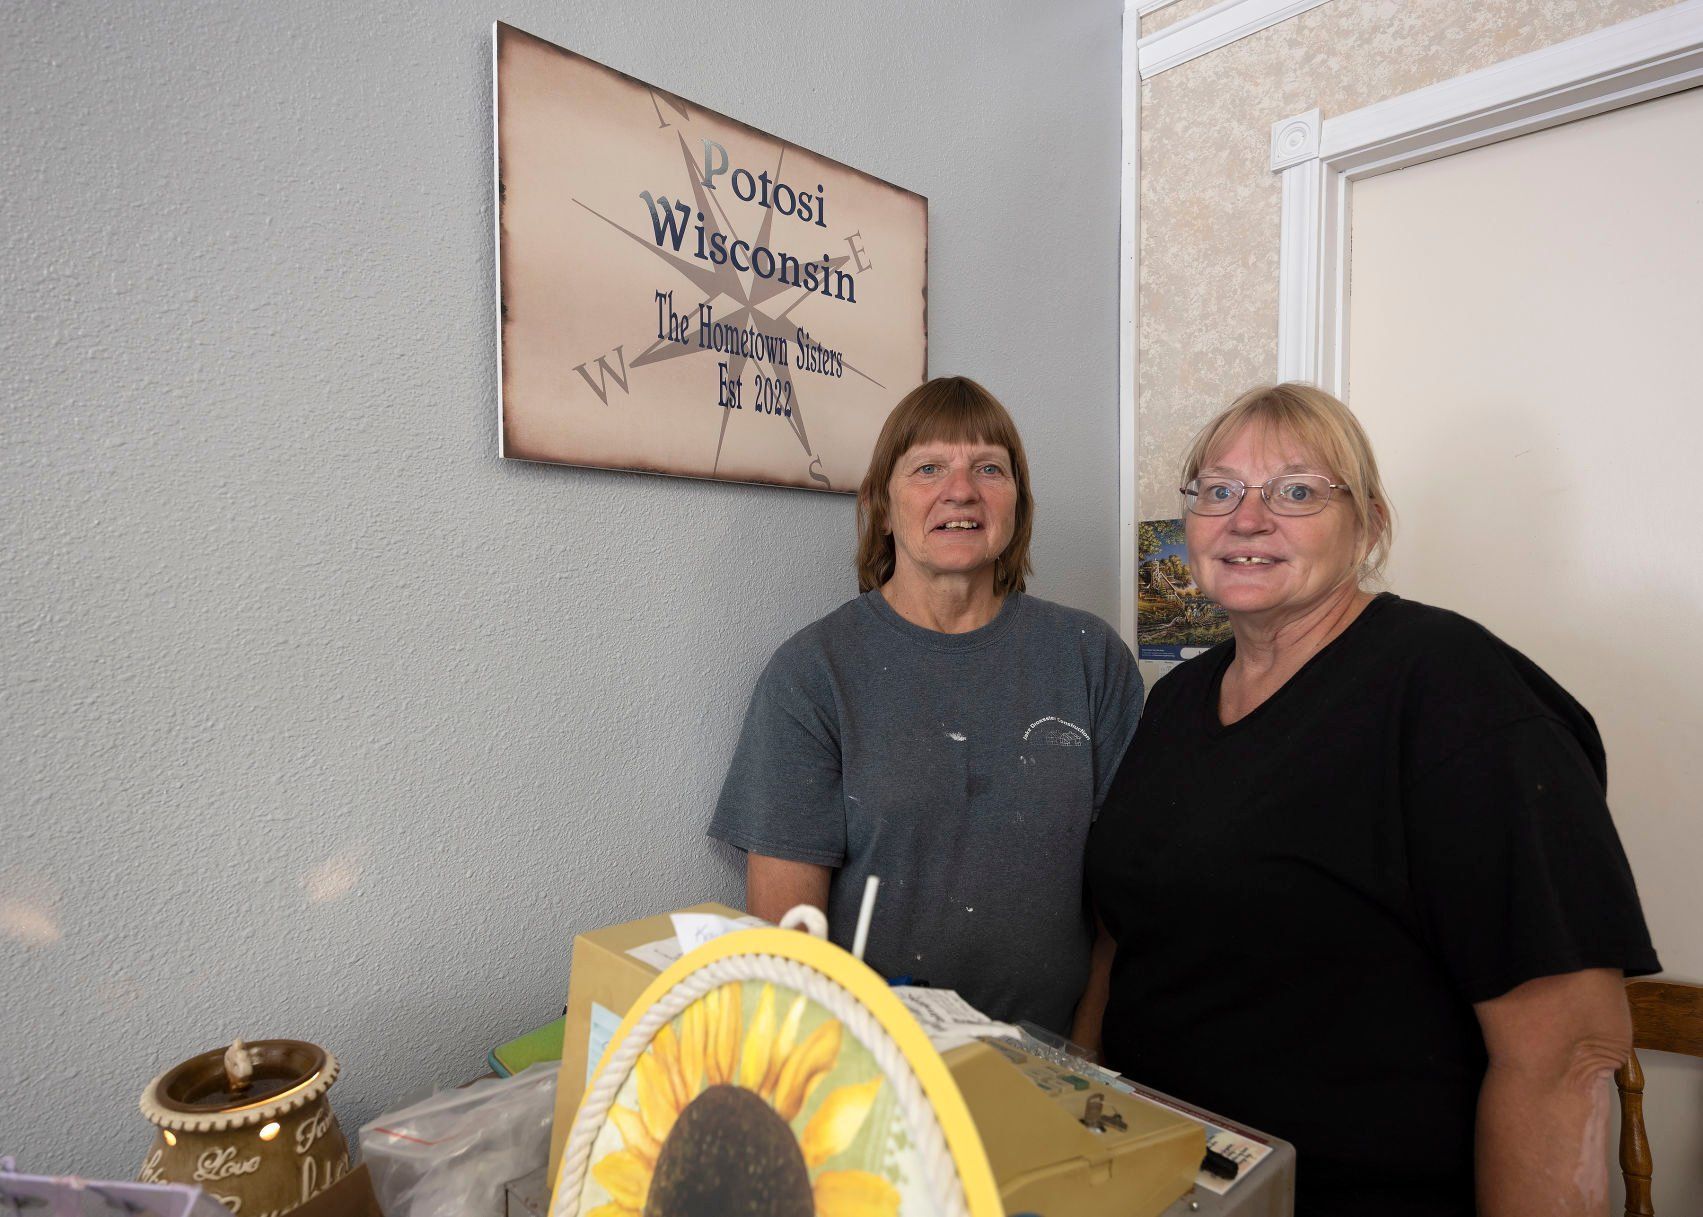 A Little Bit of Everything co-owners Anita Blindert (left) and Becky Burbach opened their new shop on Main Street in Potosi, Wis.    PHOTO CREDIT: Stephen Gassman